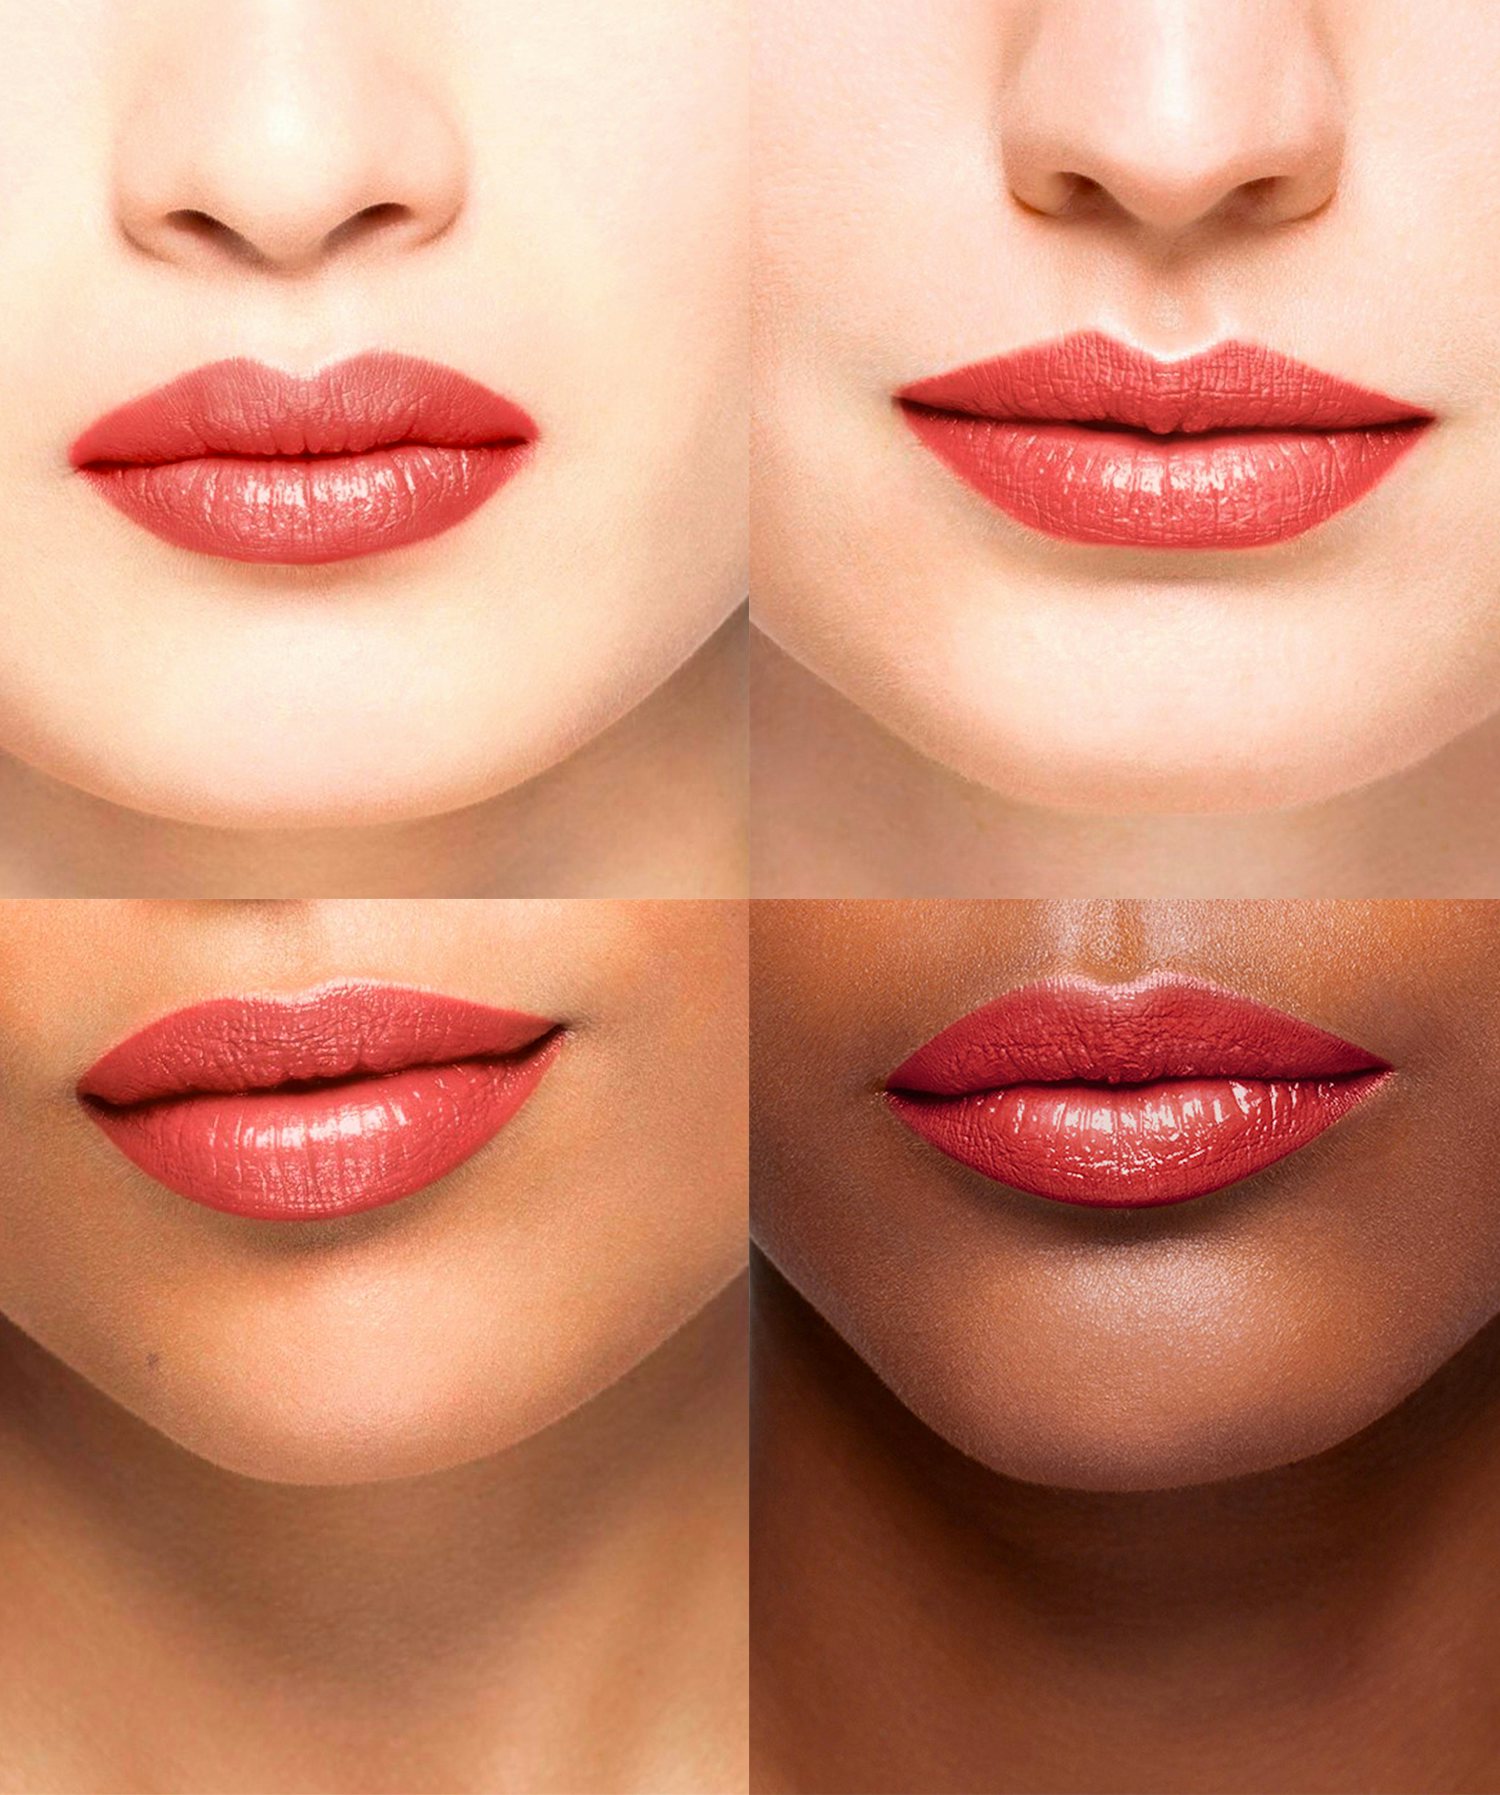 La bouche rouge Le baume rouge in the lips of the models